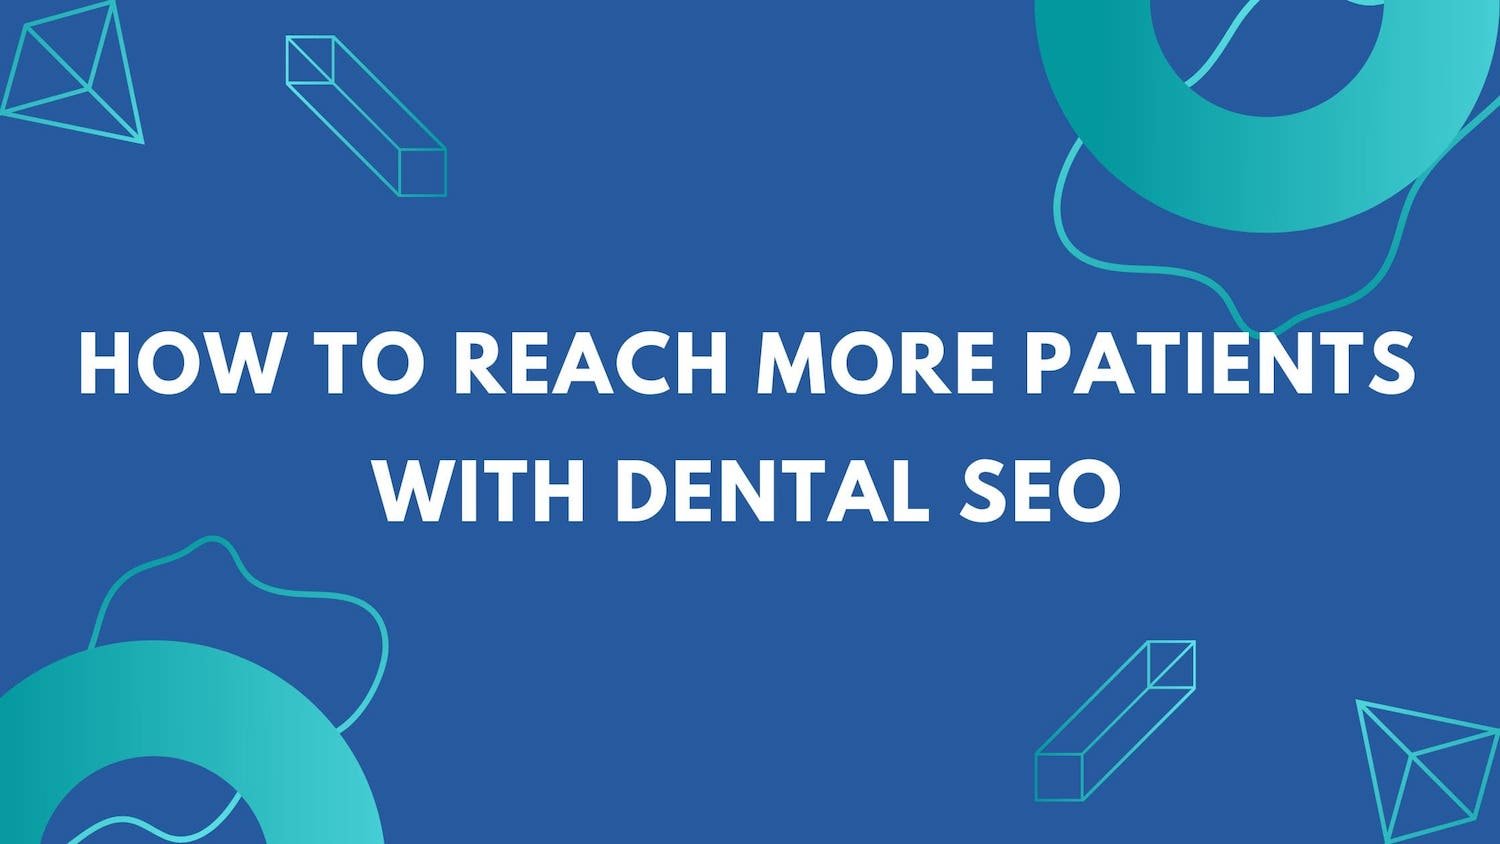 How to Reach More Patients With Dental SEO